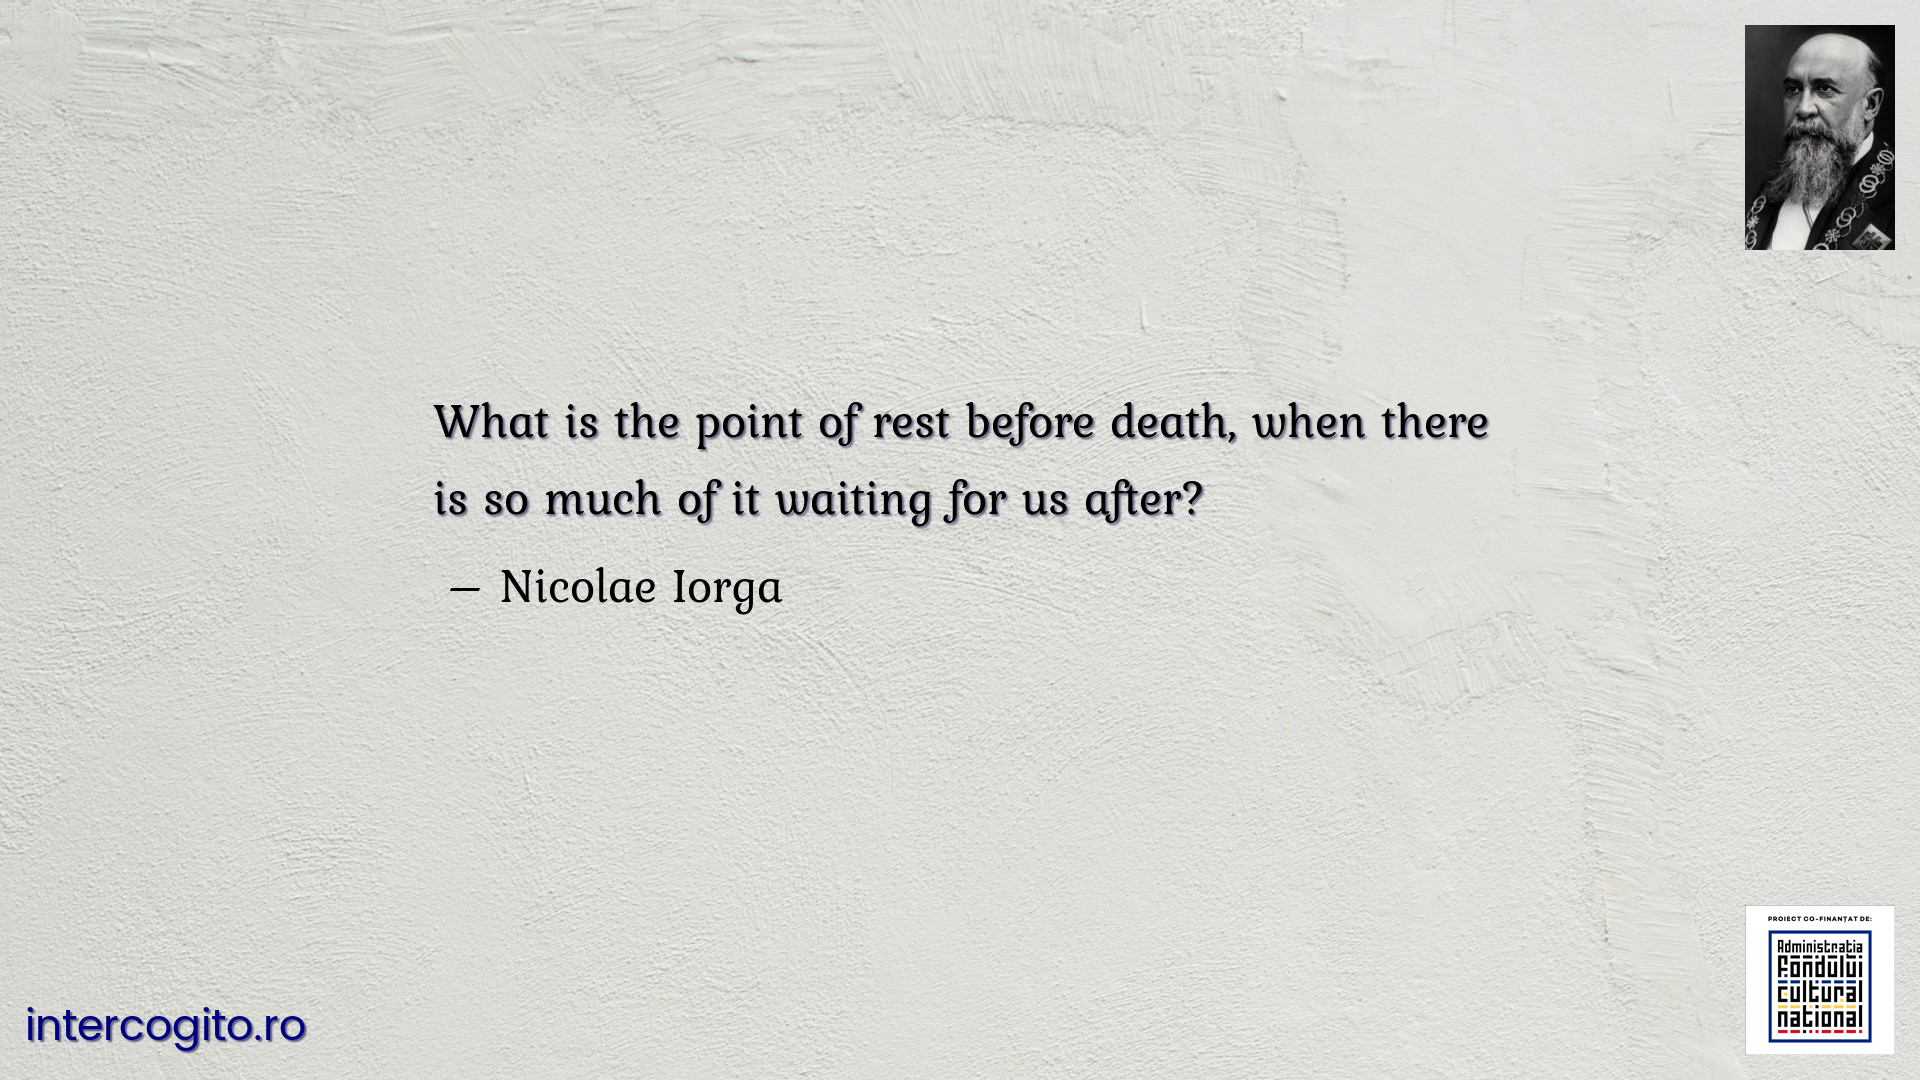 What is the point of rest before death, when there is so much of it waiting for us after?